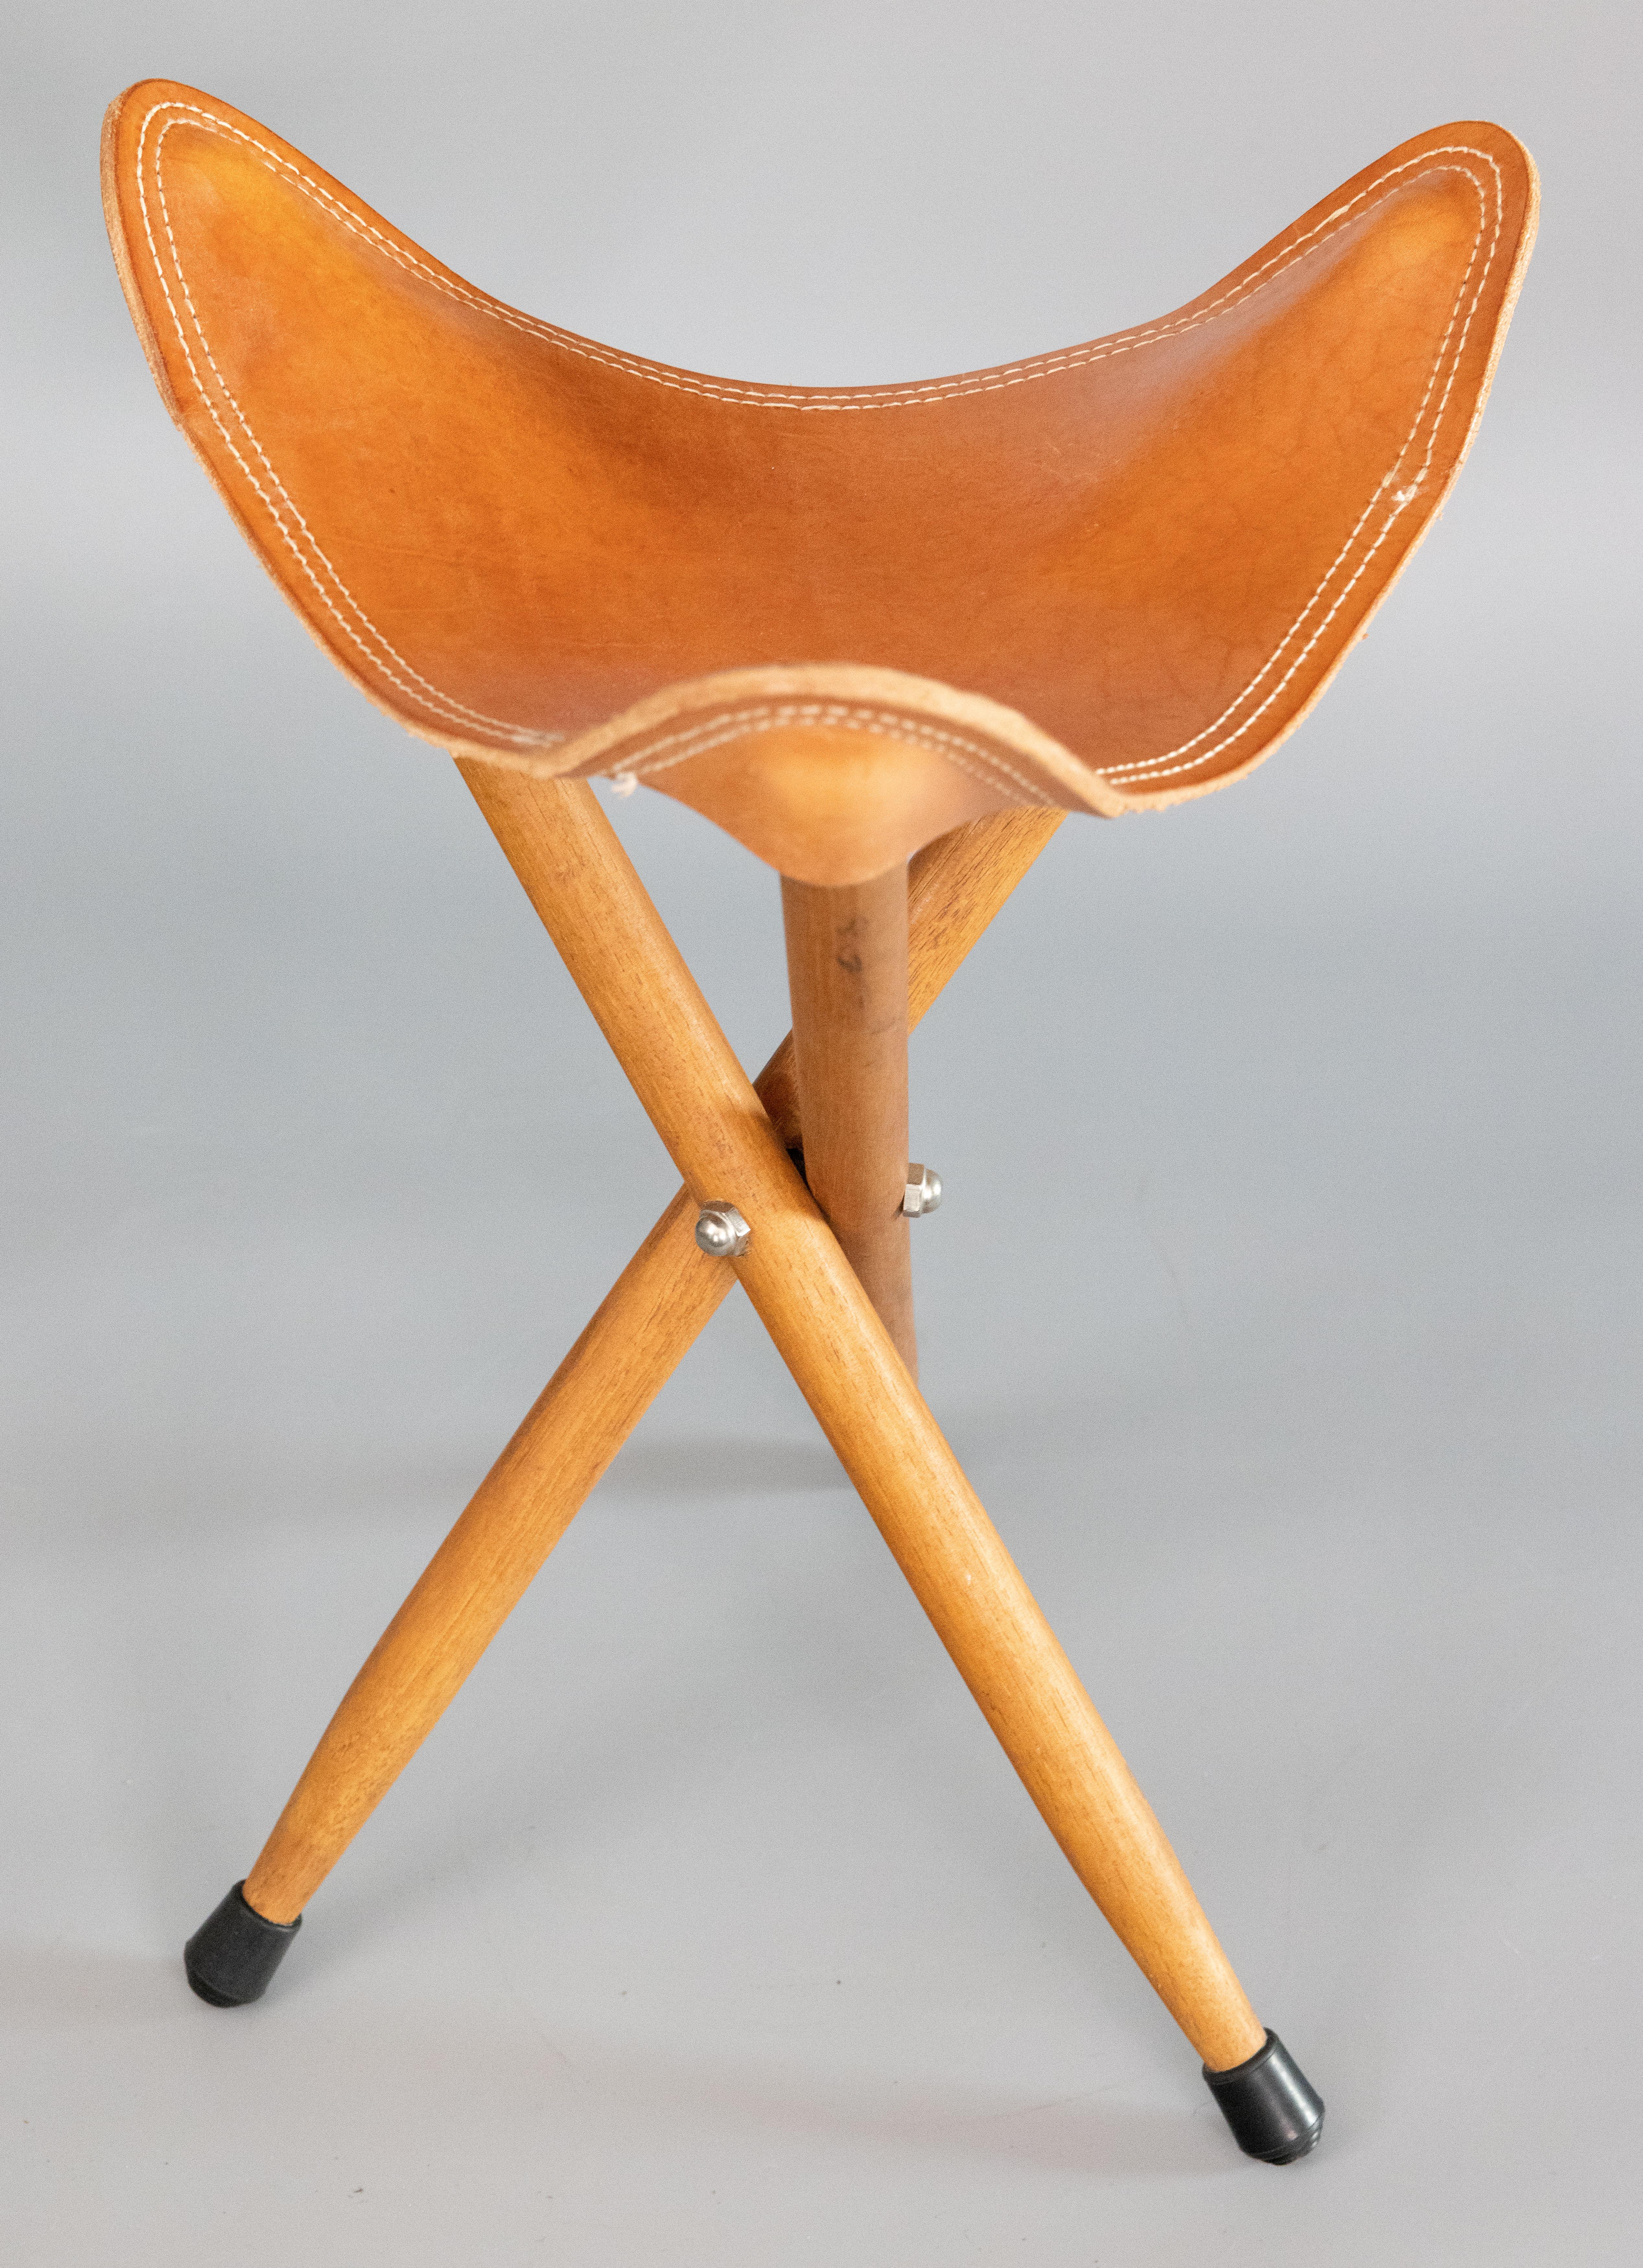 A stylish Mid-Century French Hermès style leather tripod folding stool. This is a fabulous hand crafted stool with a fine leather seat and sleek design, perfect for the modern home.

DIMENSIONS
15